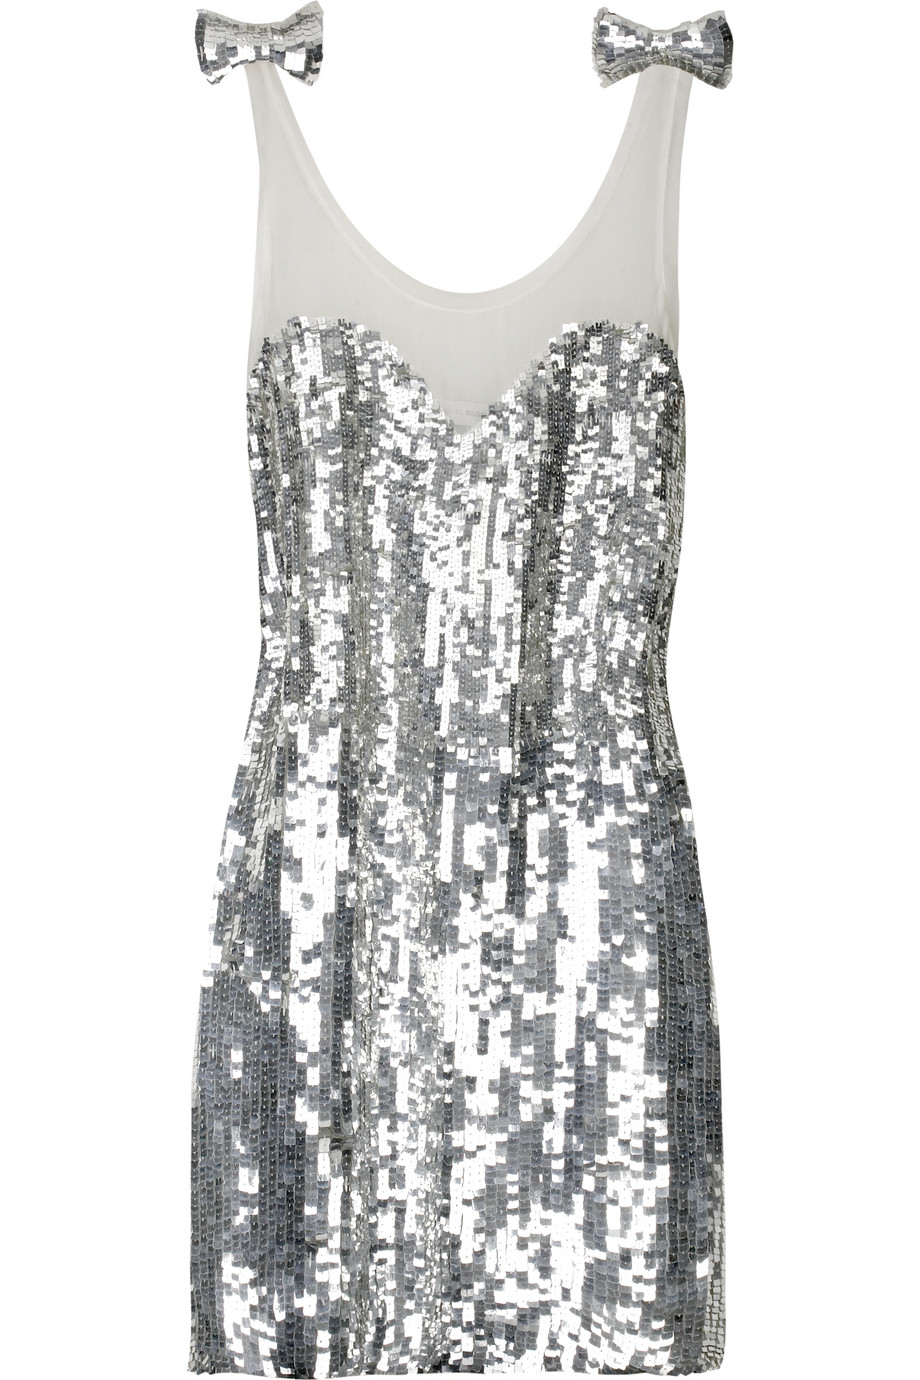 sequin silver dresses |She Fashions